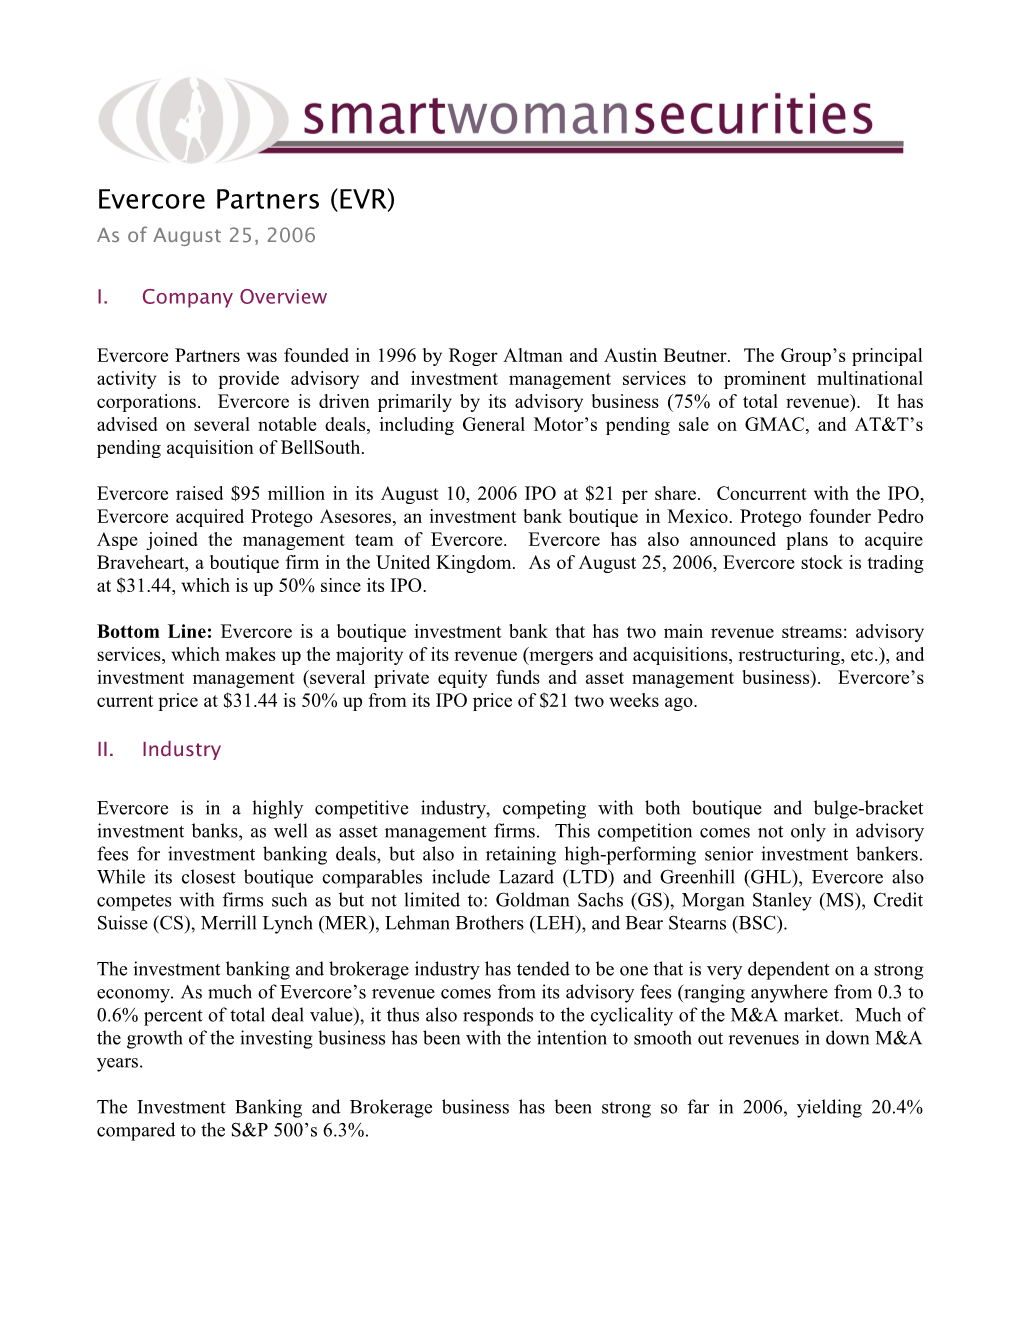 Evercore Partners (EVR)